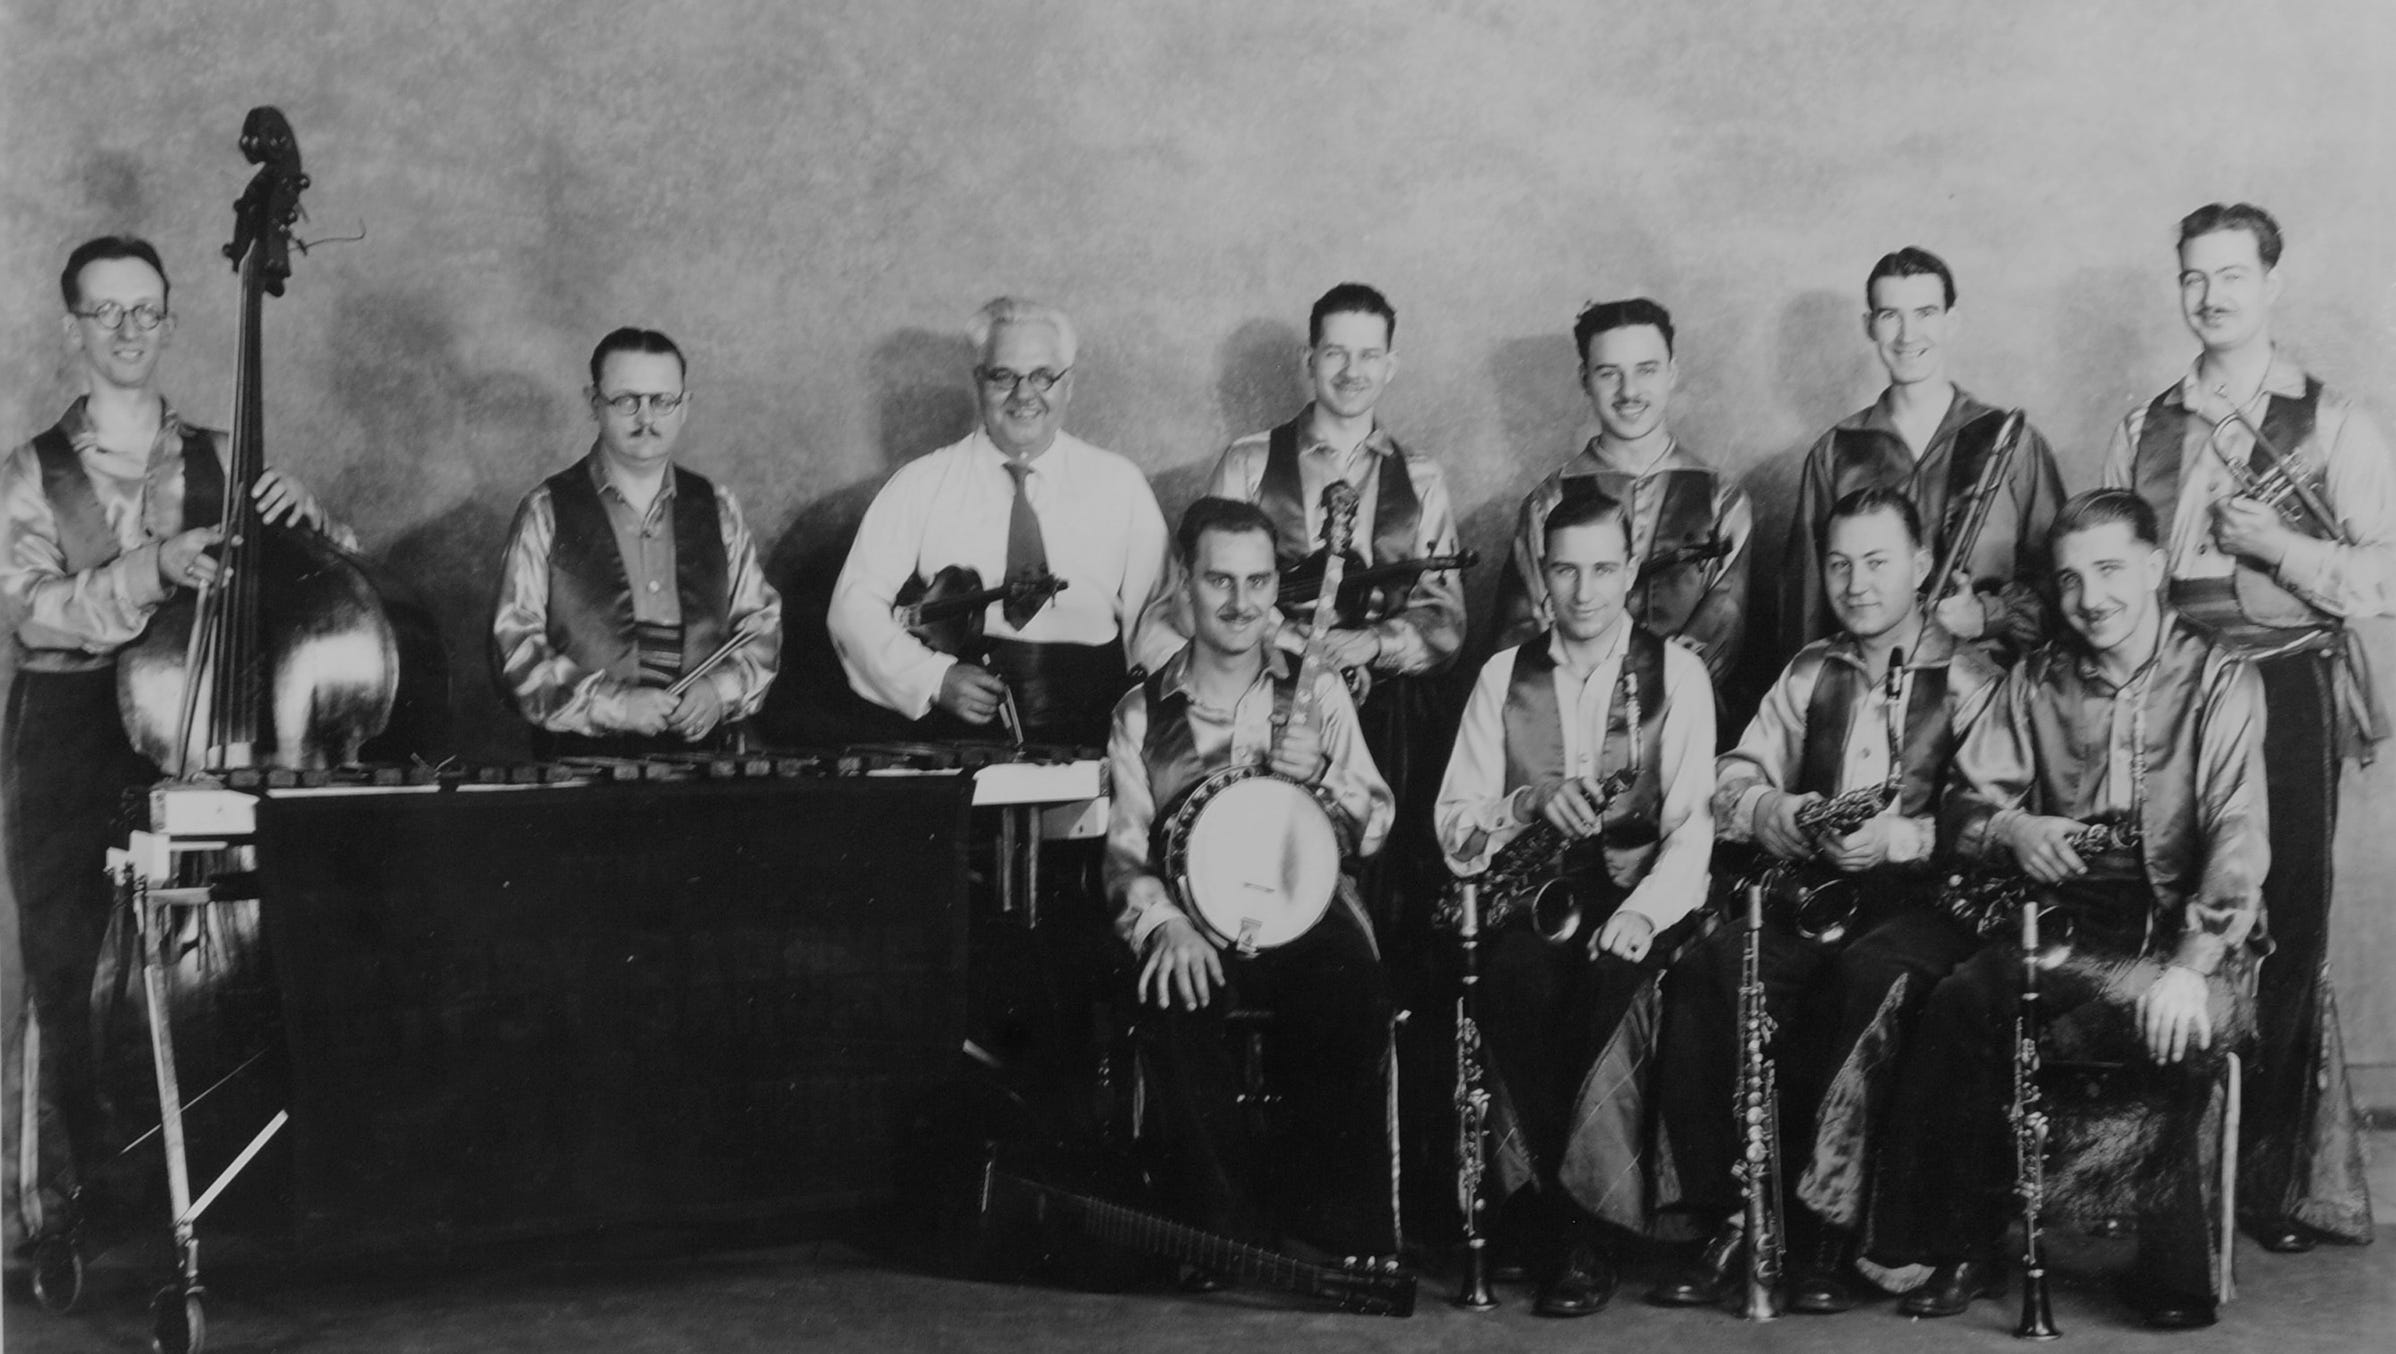 In 1927 the Gypsy Barons Orchestra replaced the WWJ-Detroit News Orchestra.  Jack Kneisel, third from left, was its conductor.